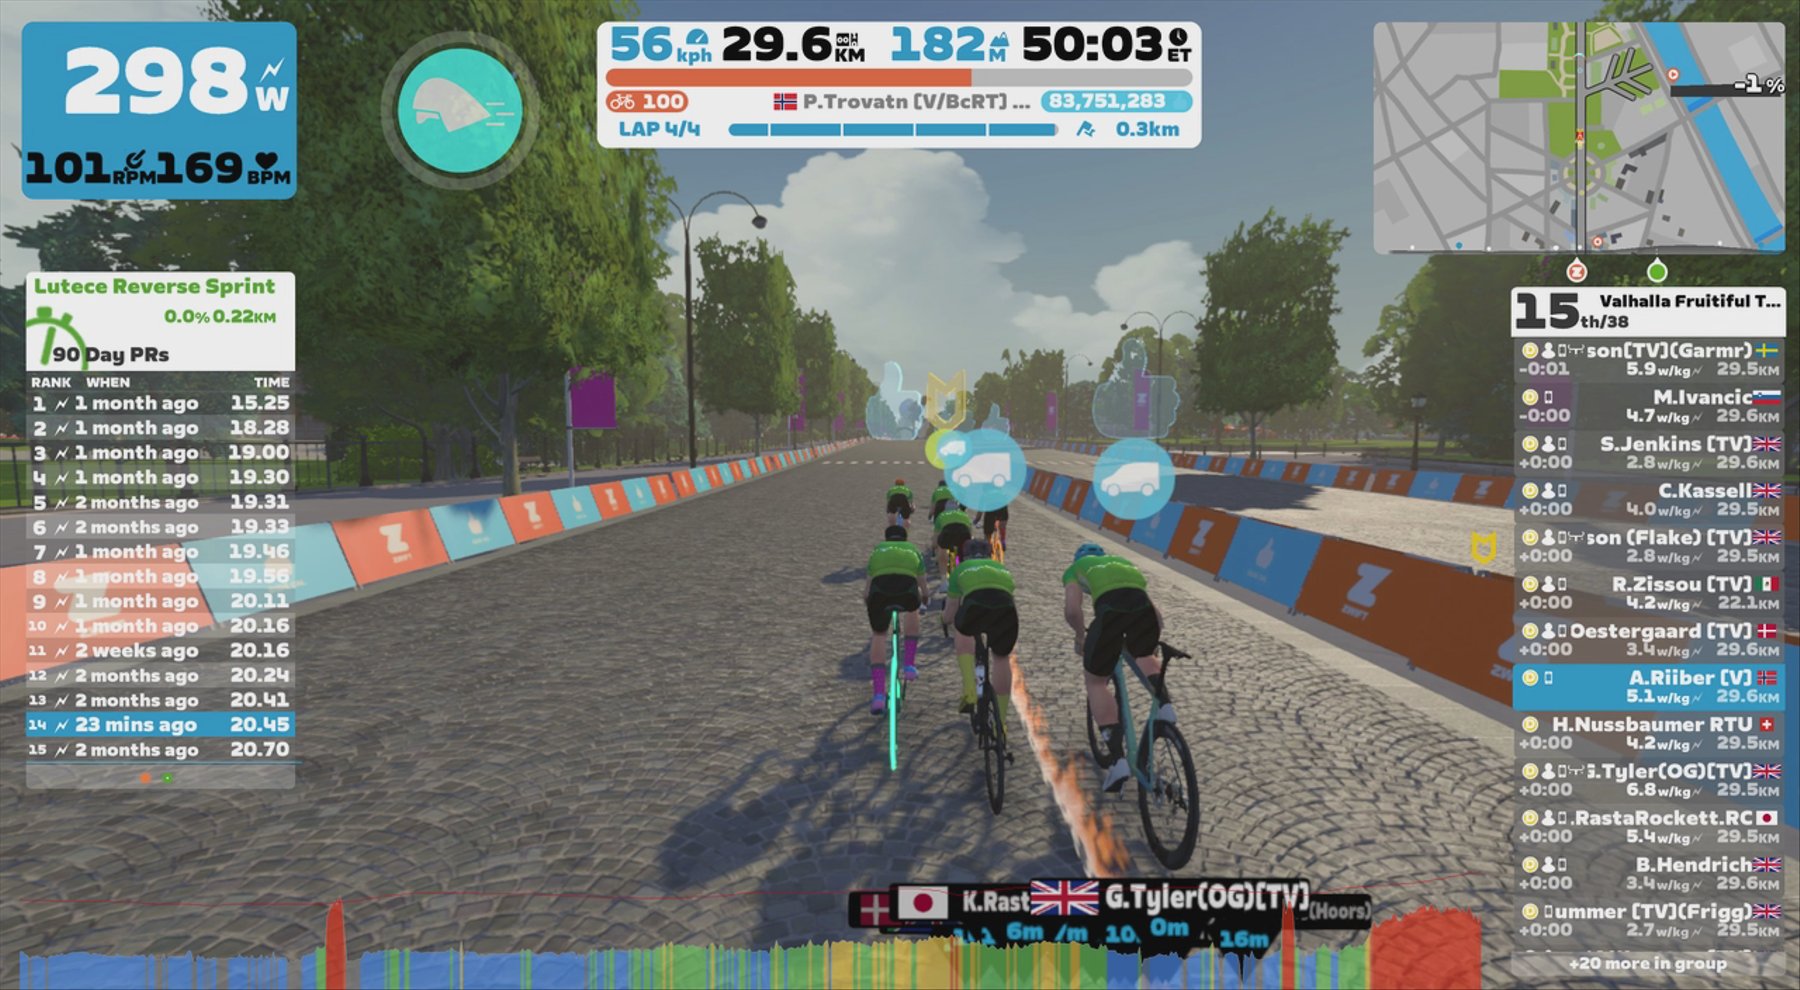 Zwift - Group Ride: Valhalla Fruitiful Team Chase (D) on Lutece Express in Paris - great lead & sweep by Flake & MattW - and nice afterparty ending w/Carsten bro & Vince